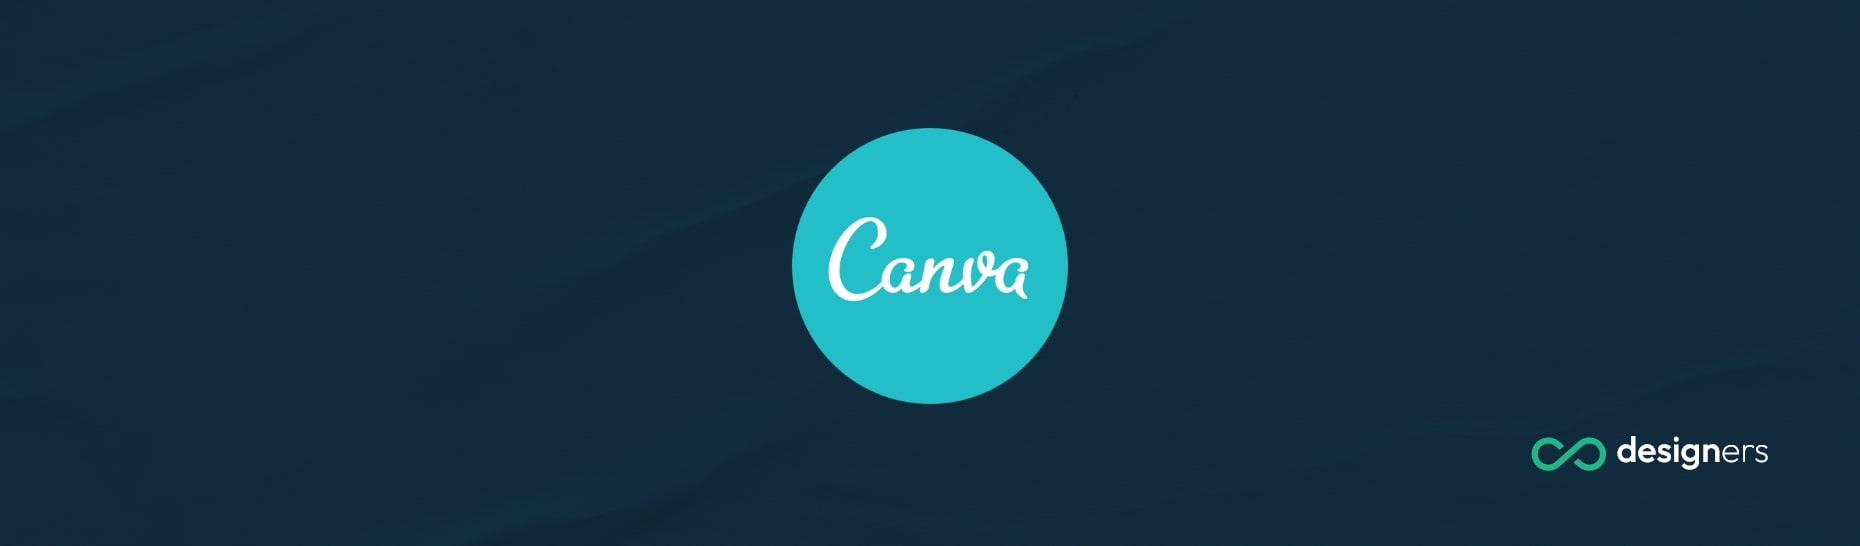 How Did Canva Grow So Quickly?